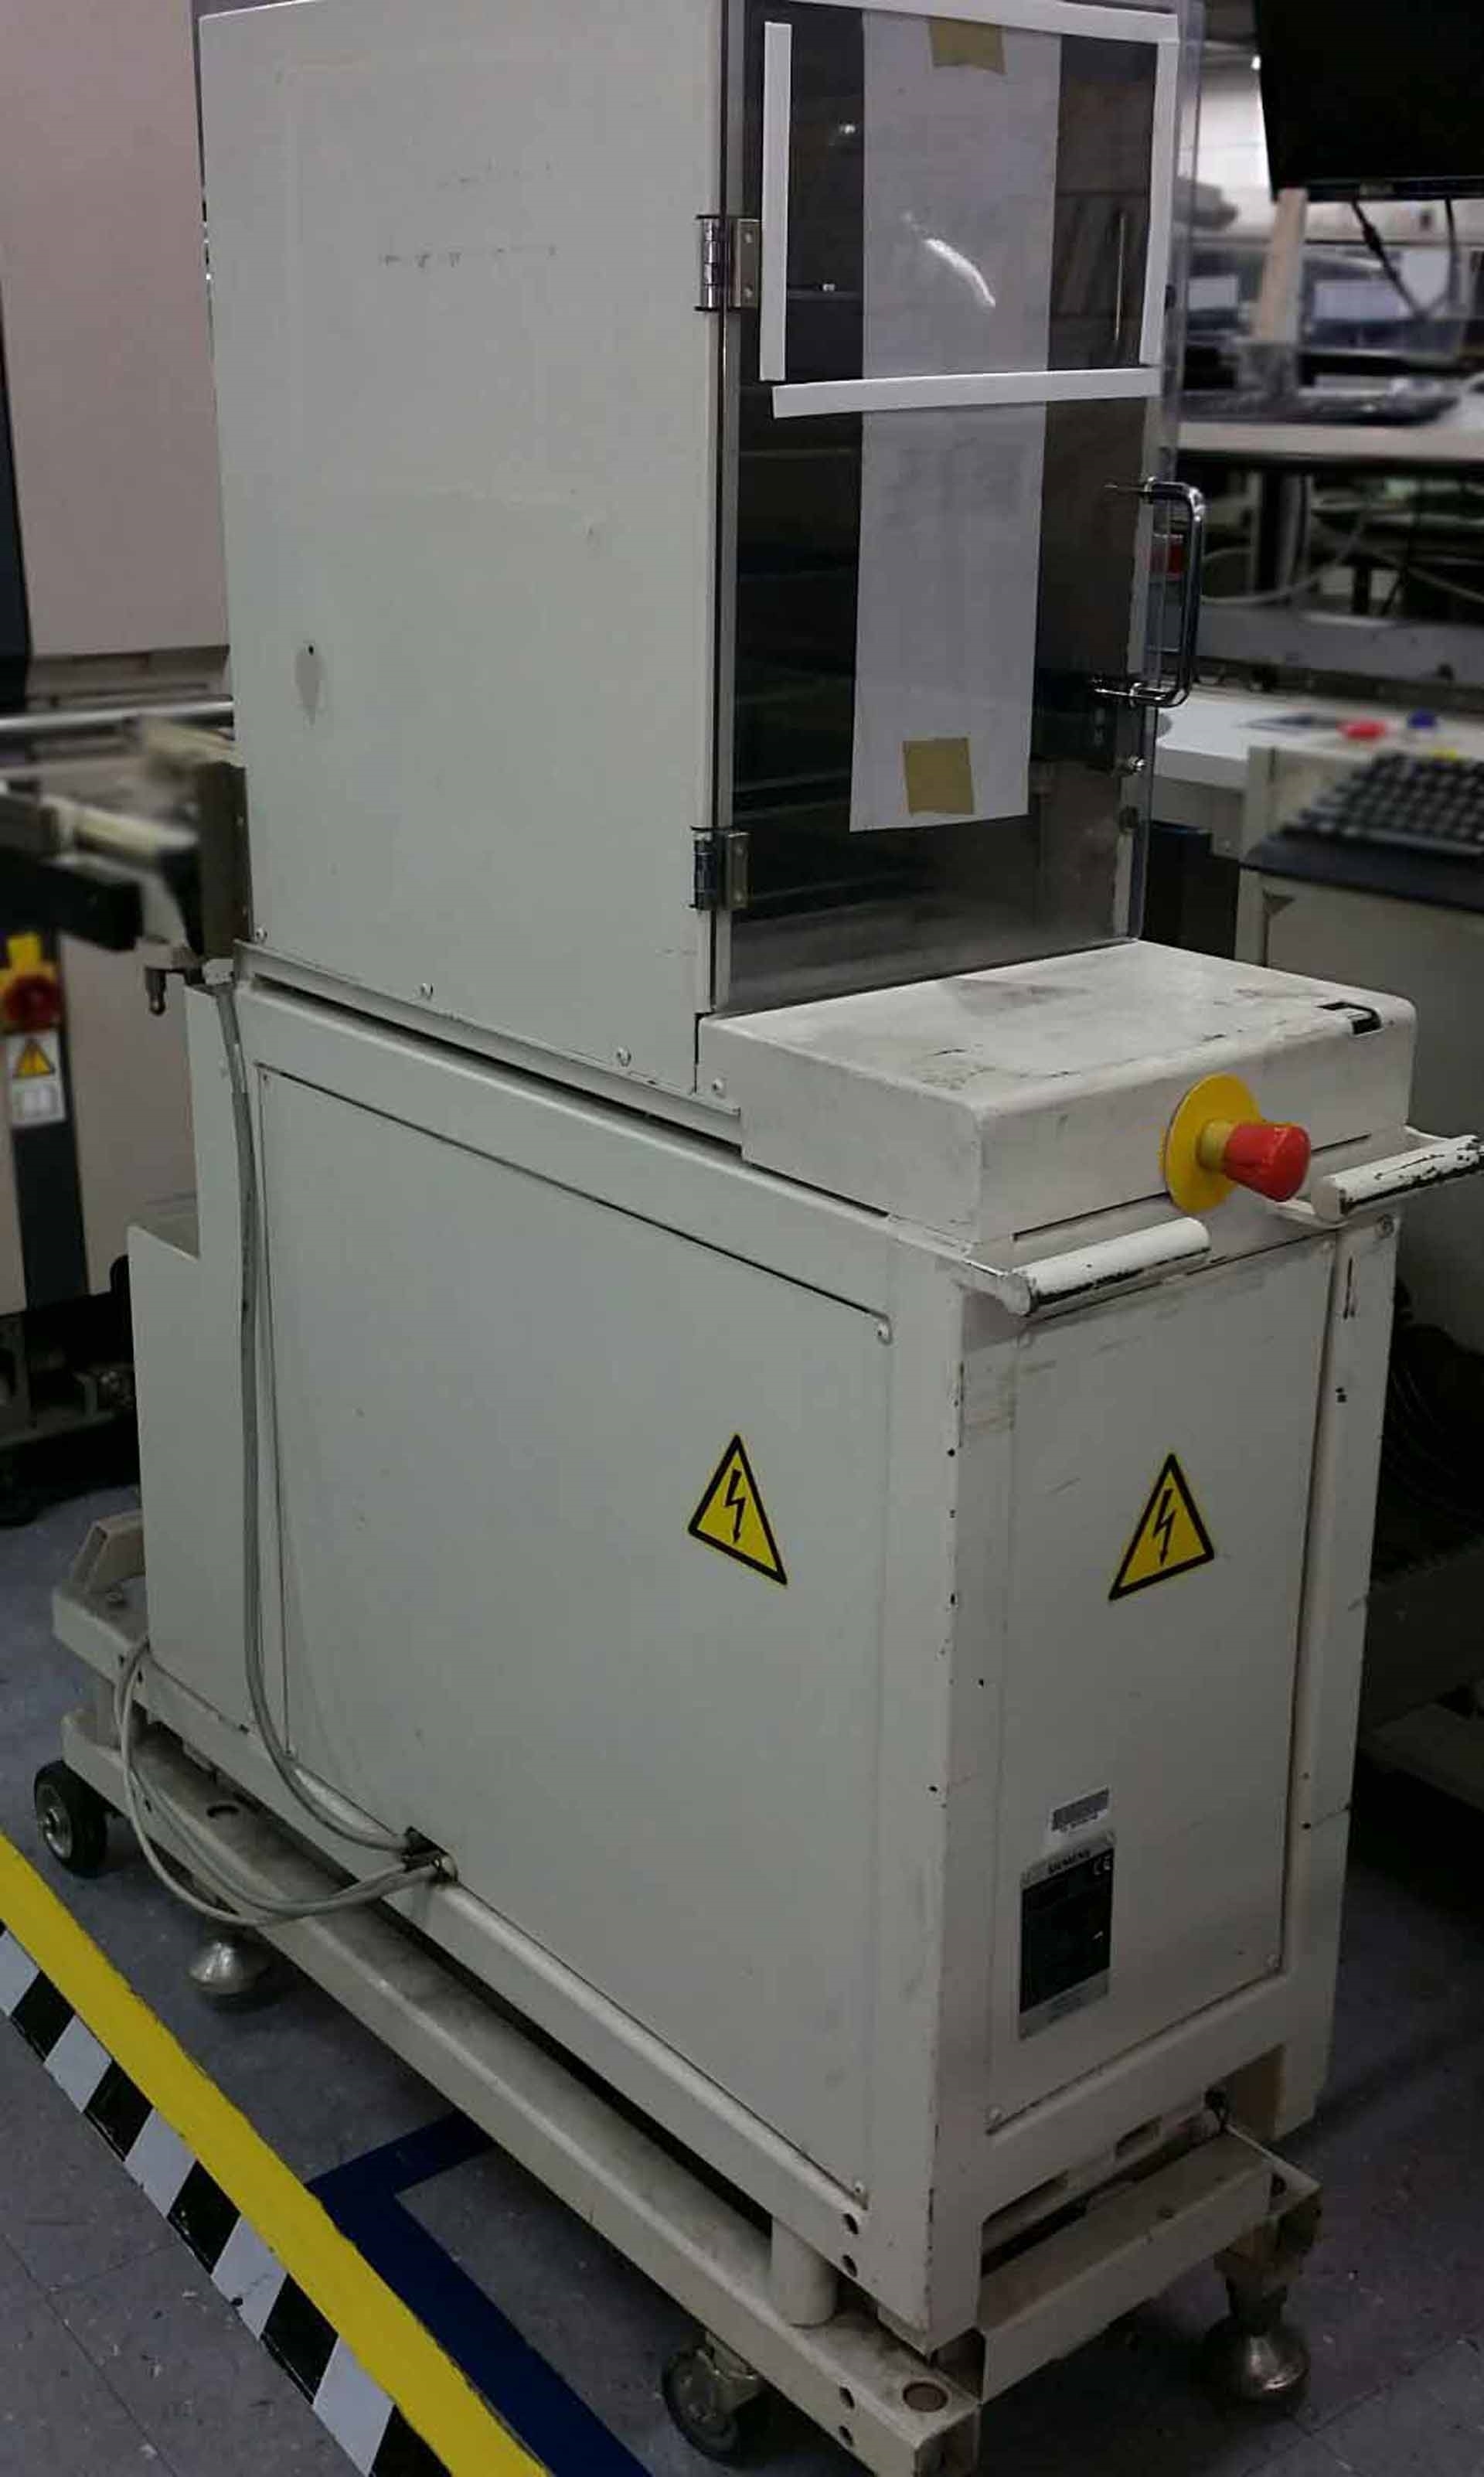 Photo Used SIEMENS WPW 3-950 For Sale